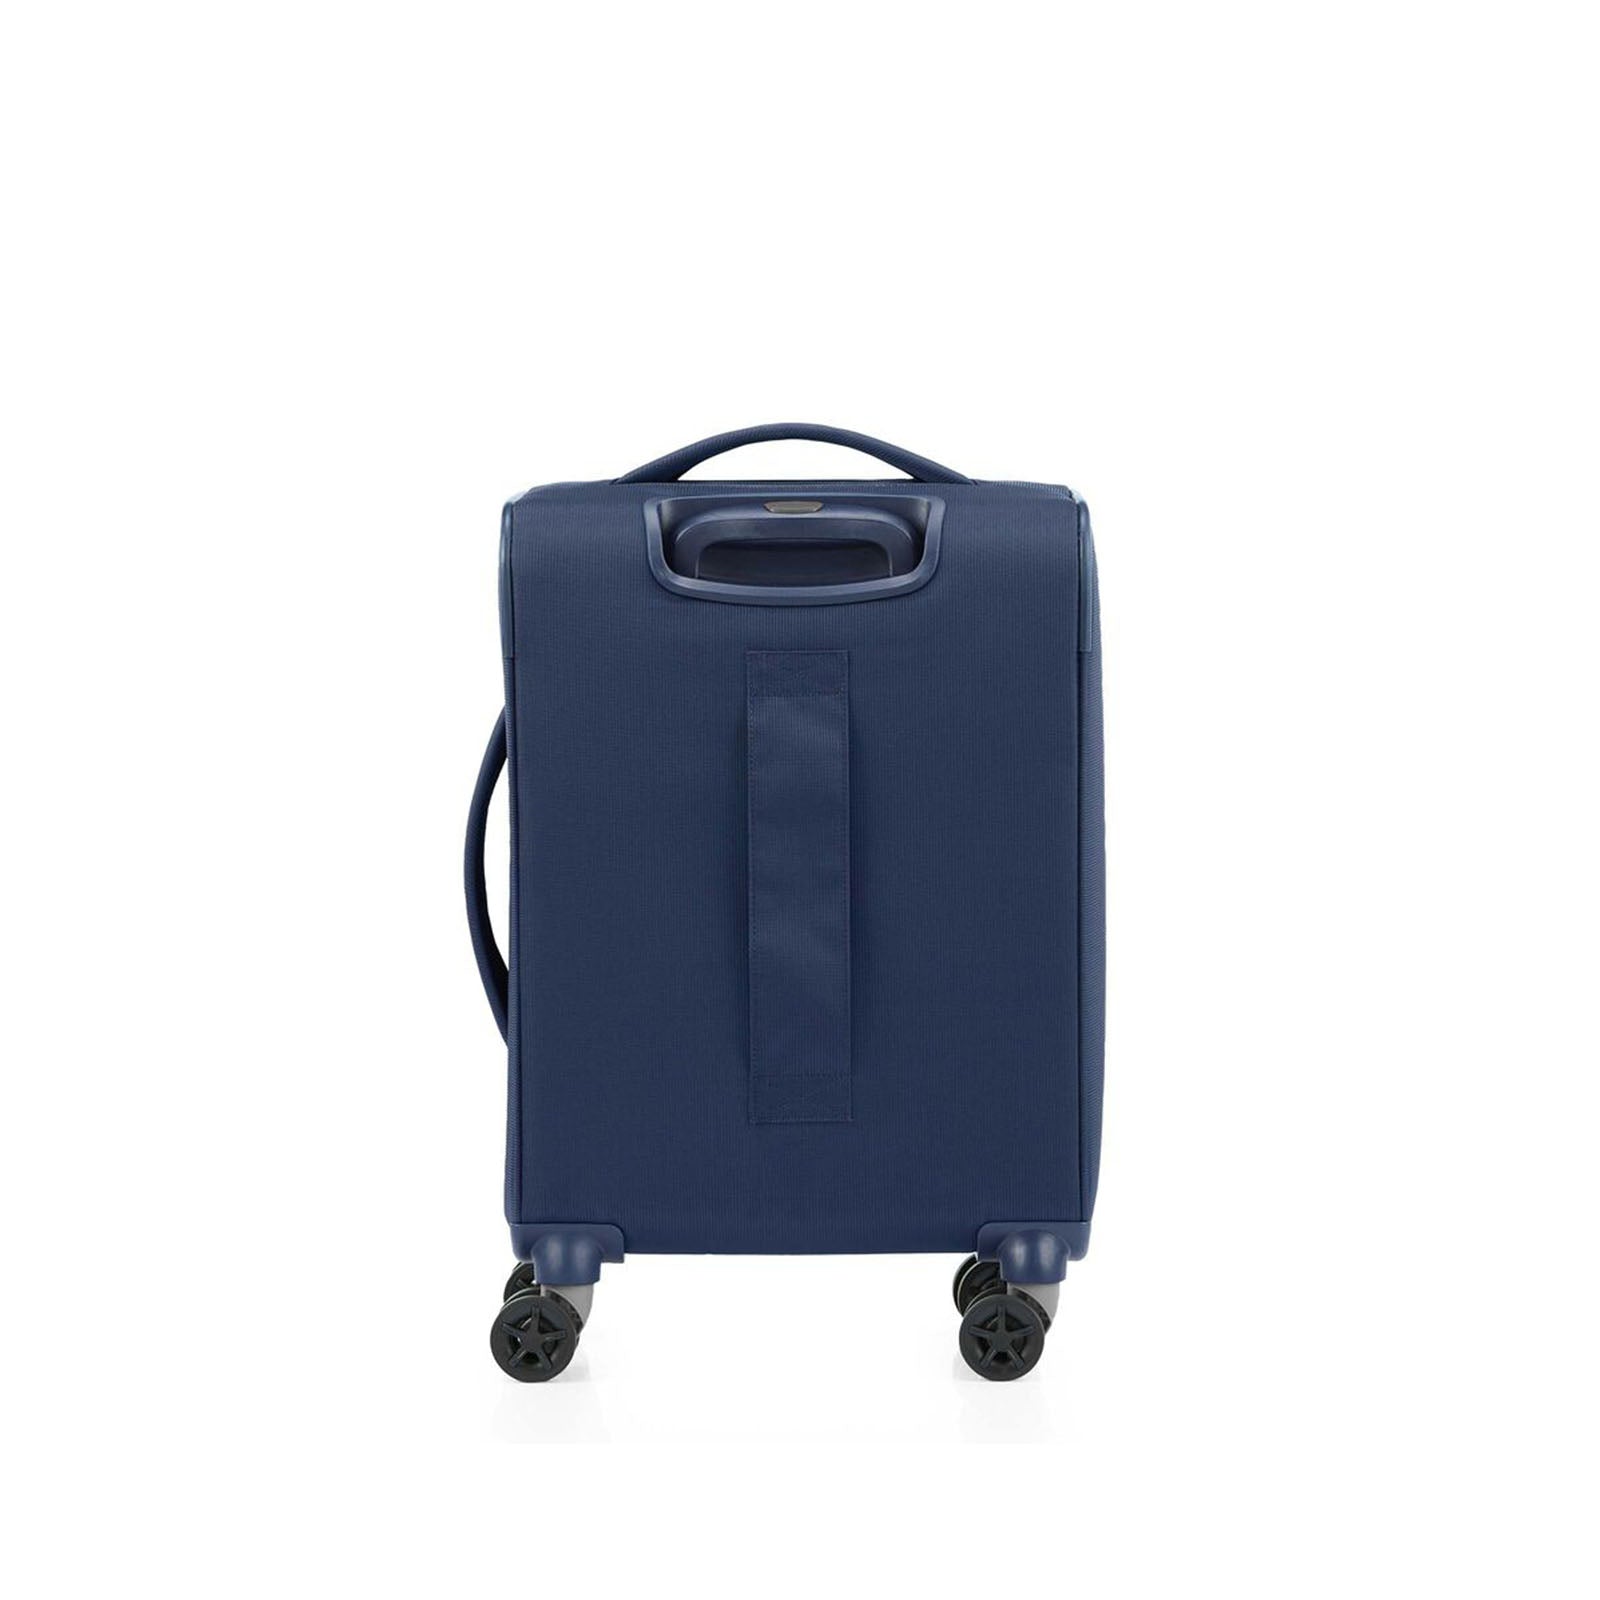 American-Tourister-Applite-4-Eco-55cm-Carry-On-Suitcase-Navy-Back